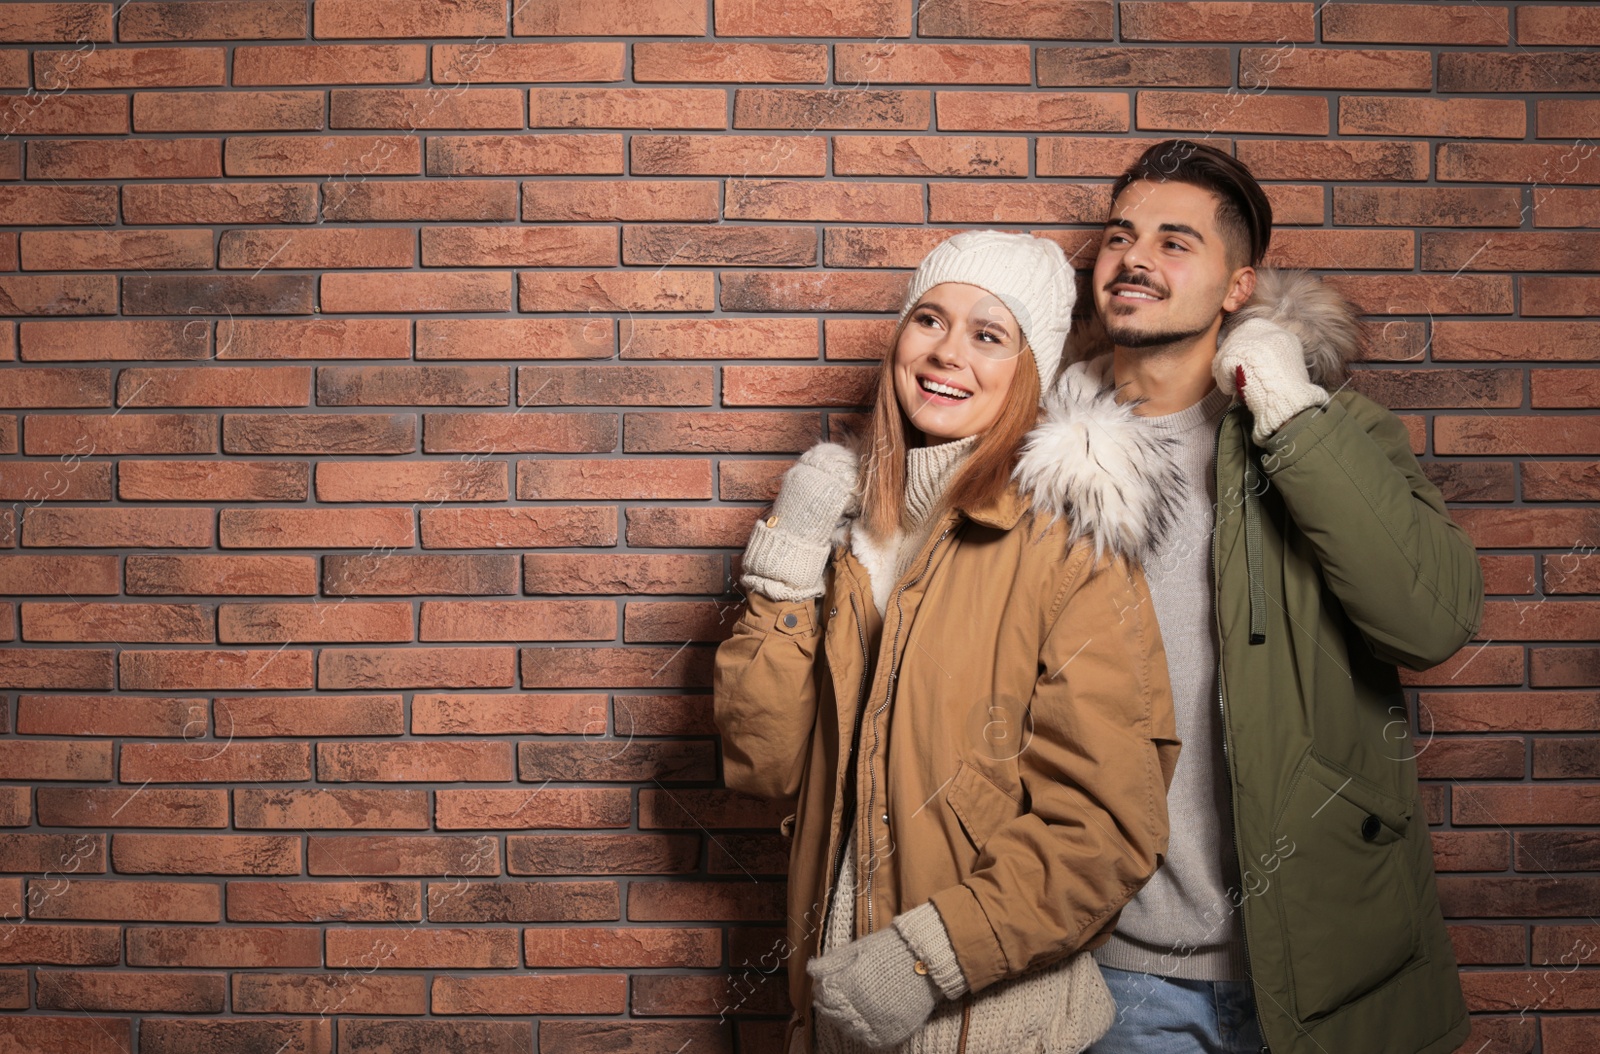 Photo of Young couple wearing warm clothes against brick wall, space for text. Ready for winter vacation